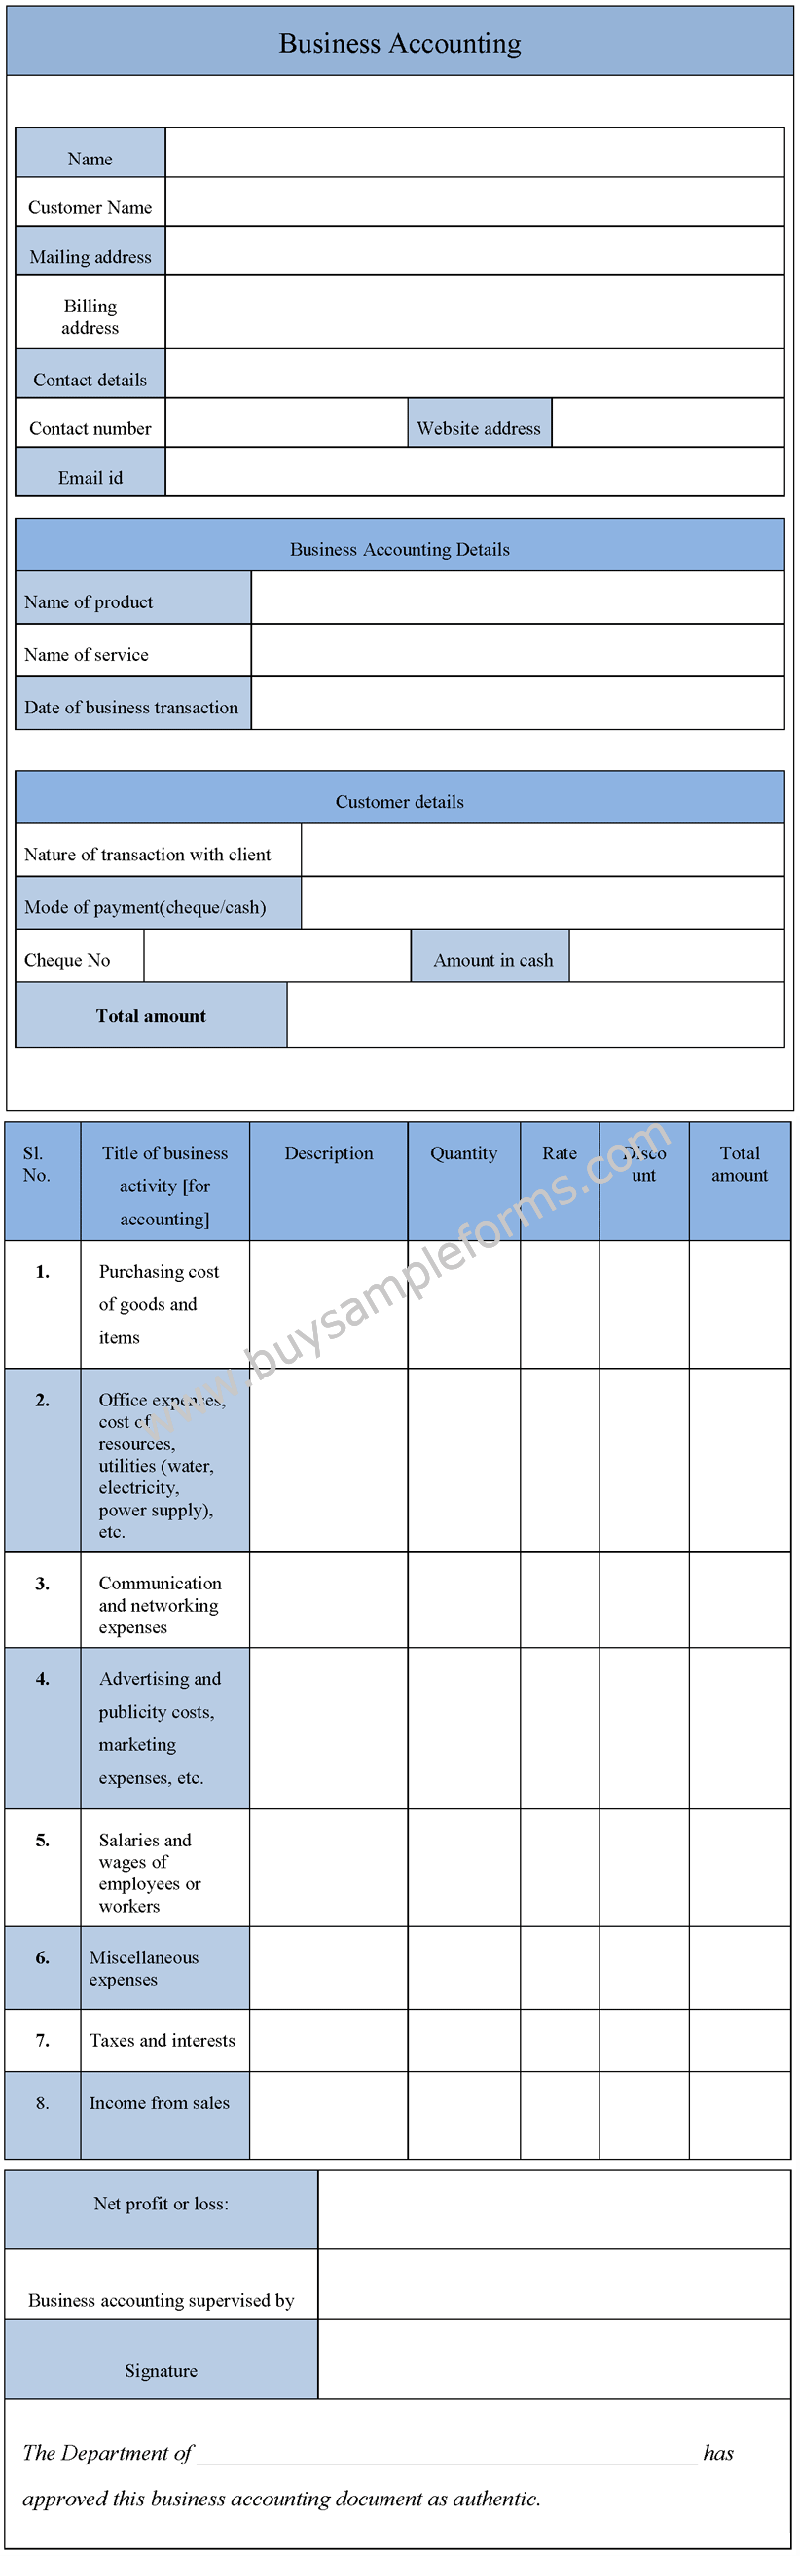 Sample Business Accounting Form, Accounting Template